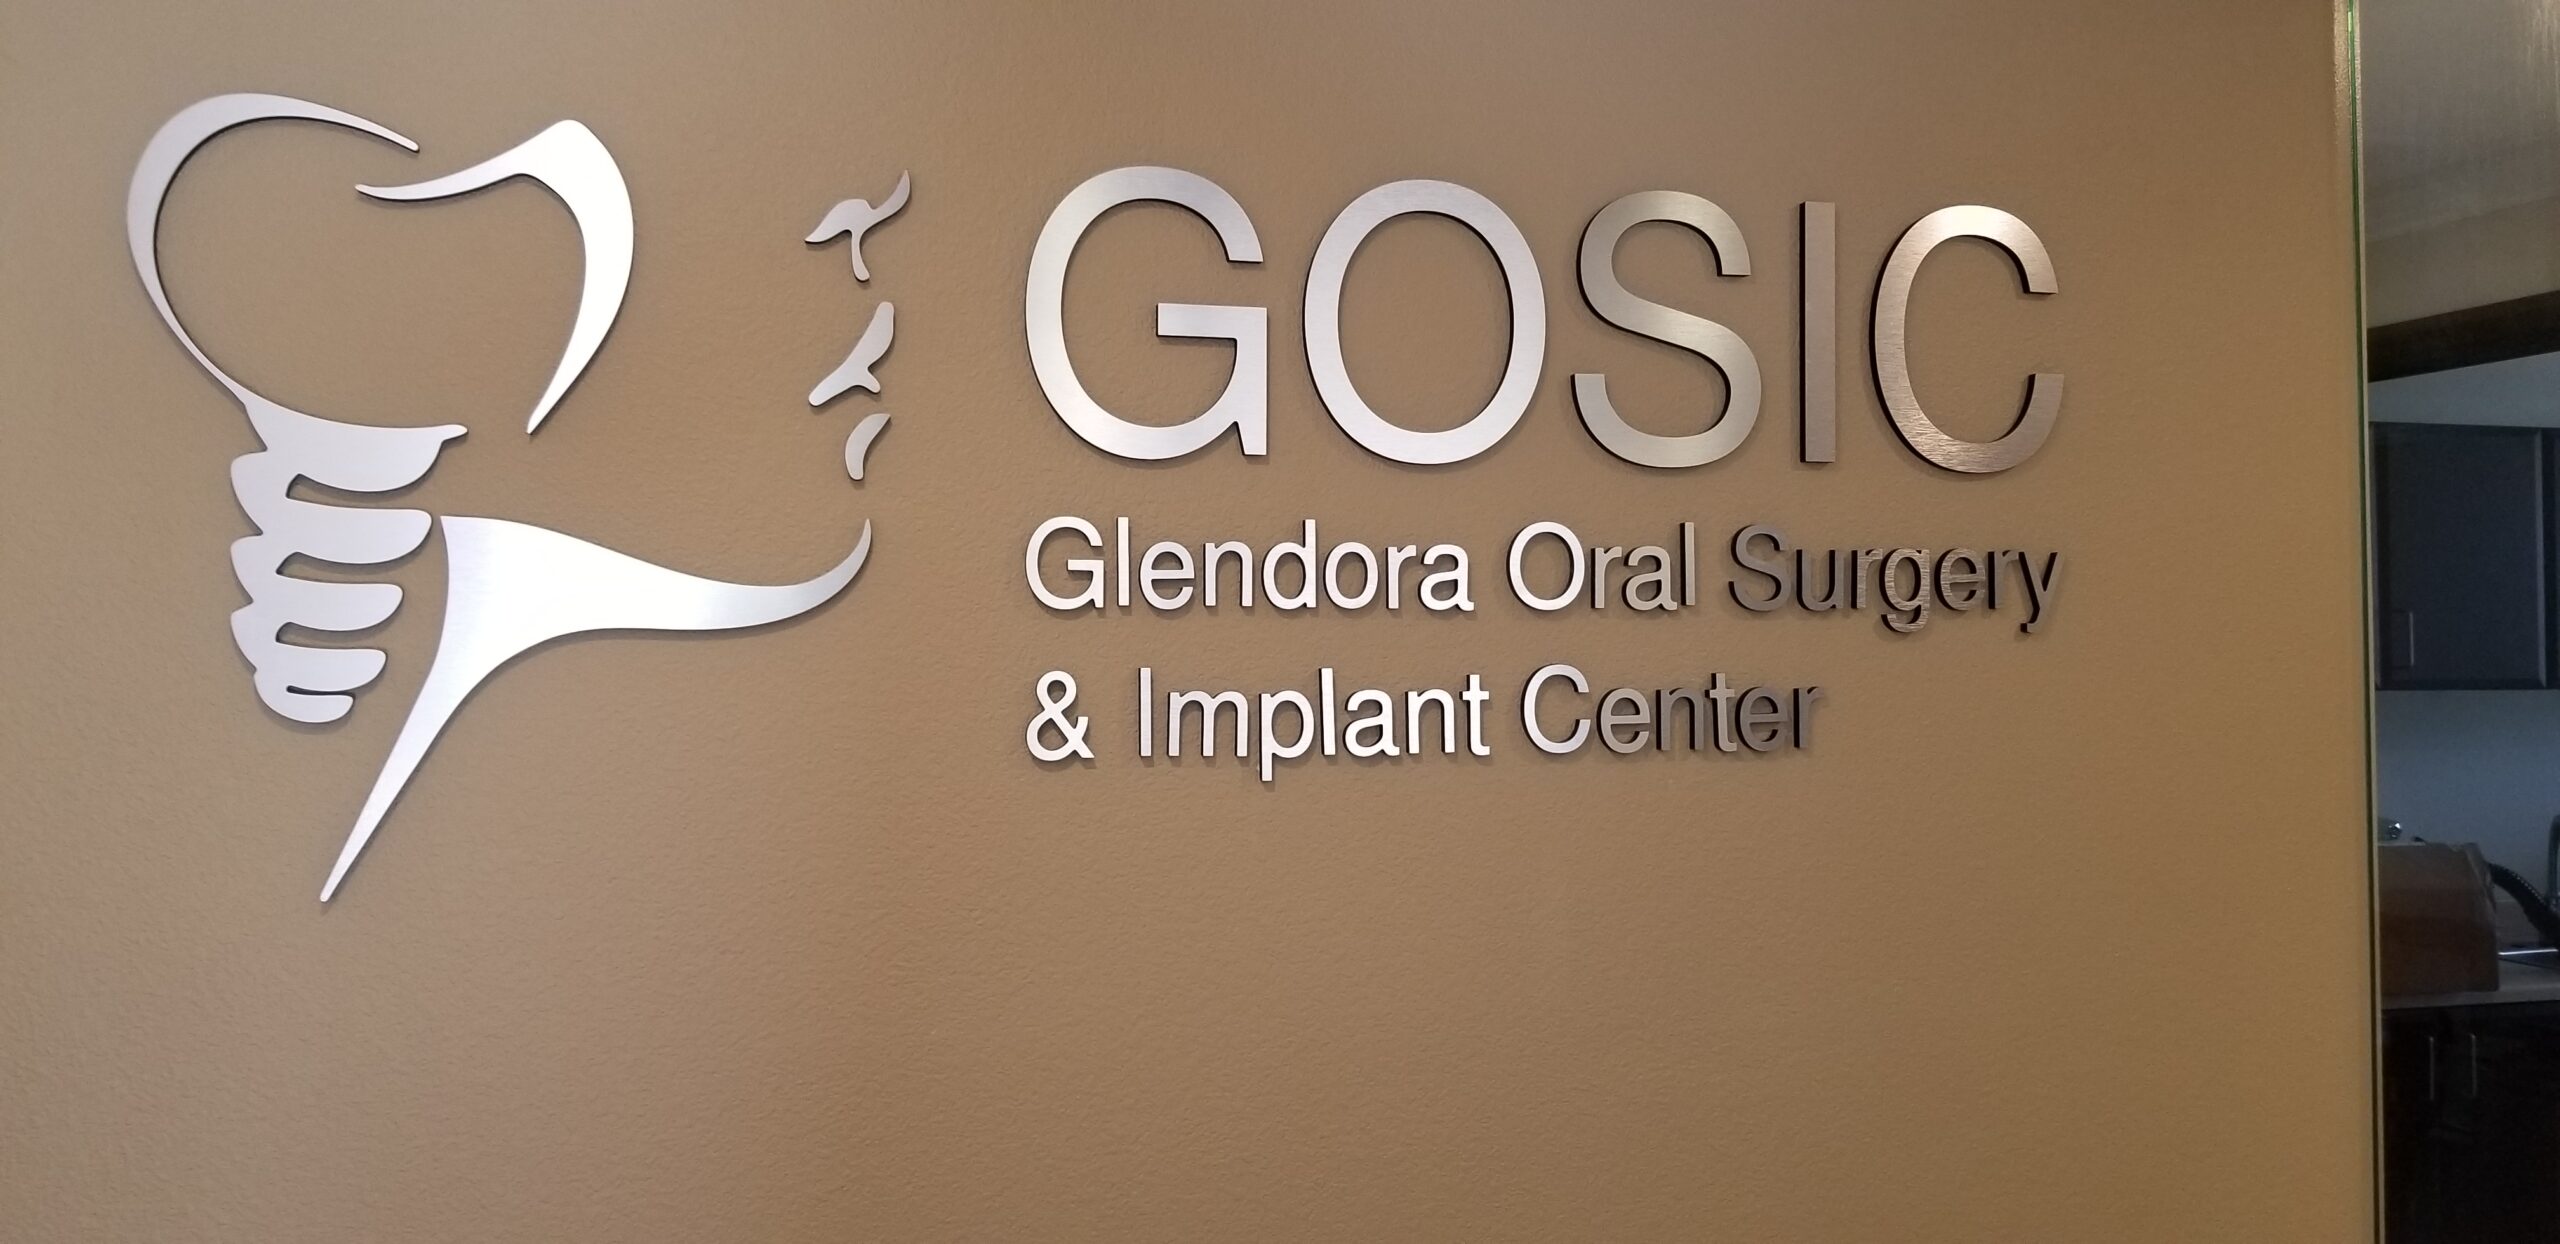 You are currently viewing Dental Clinic Lobby Sign for Glendora Oral Surgery